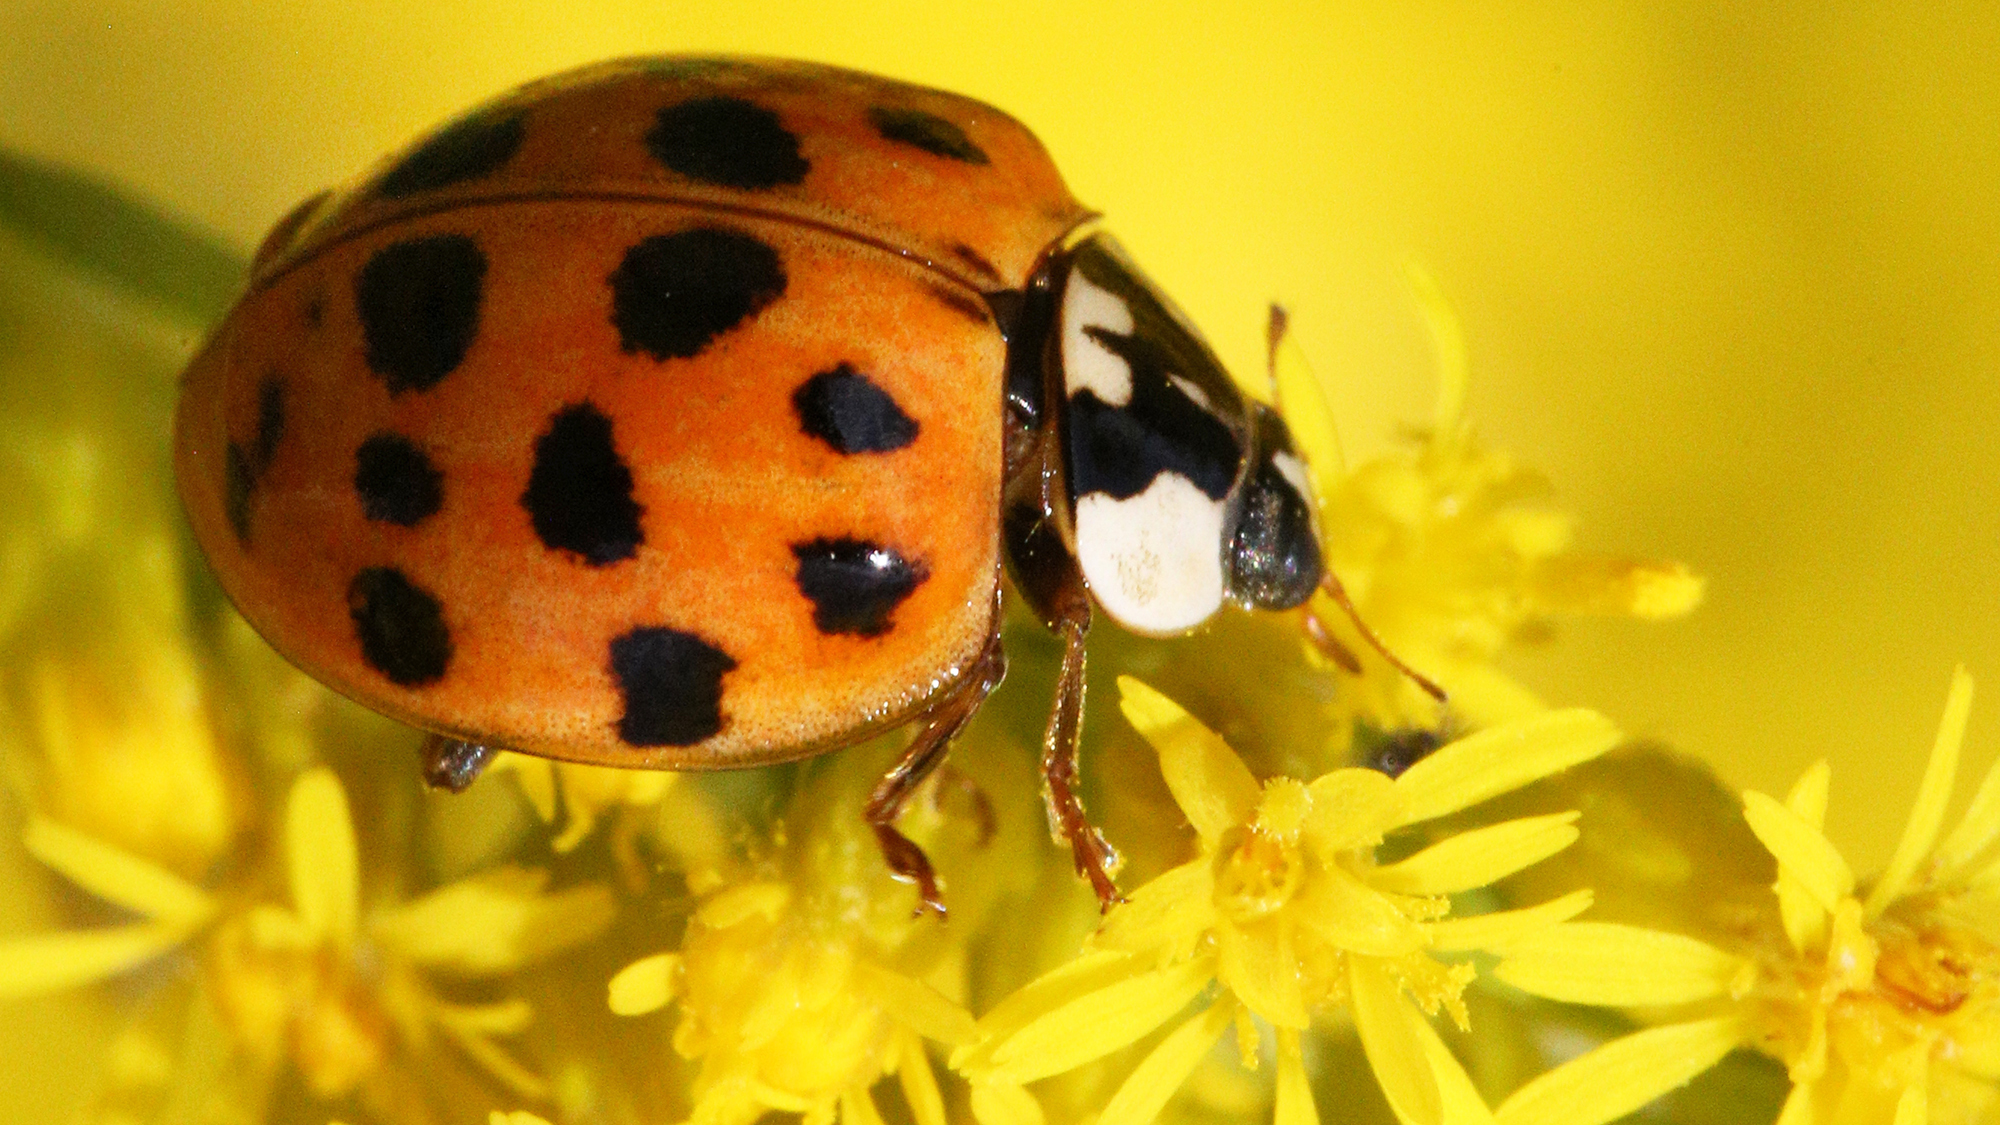 The Asian Lady Beetle (Harmonia axyridis) aka the Halloween beetle looks very similar to more common ladybugs, but they are generally bigger and with more spots. The bug is sitting on a yellow flower.